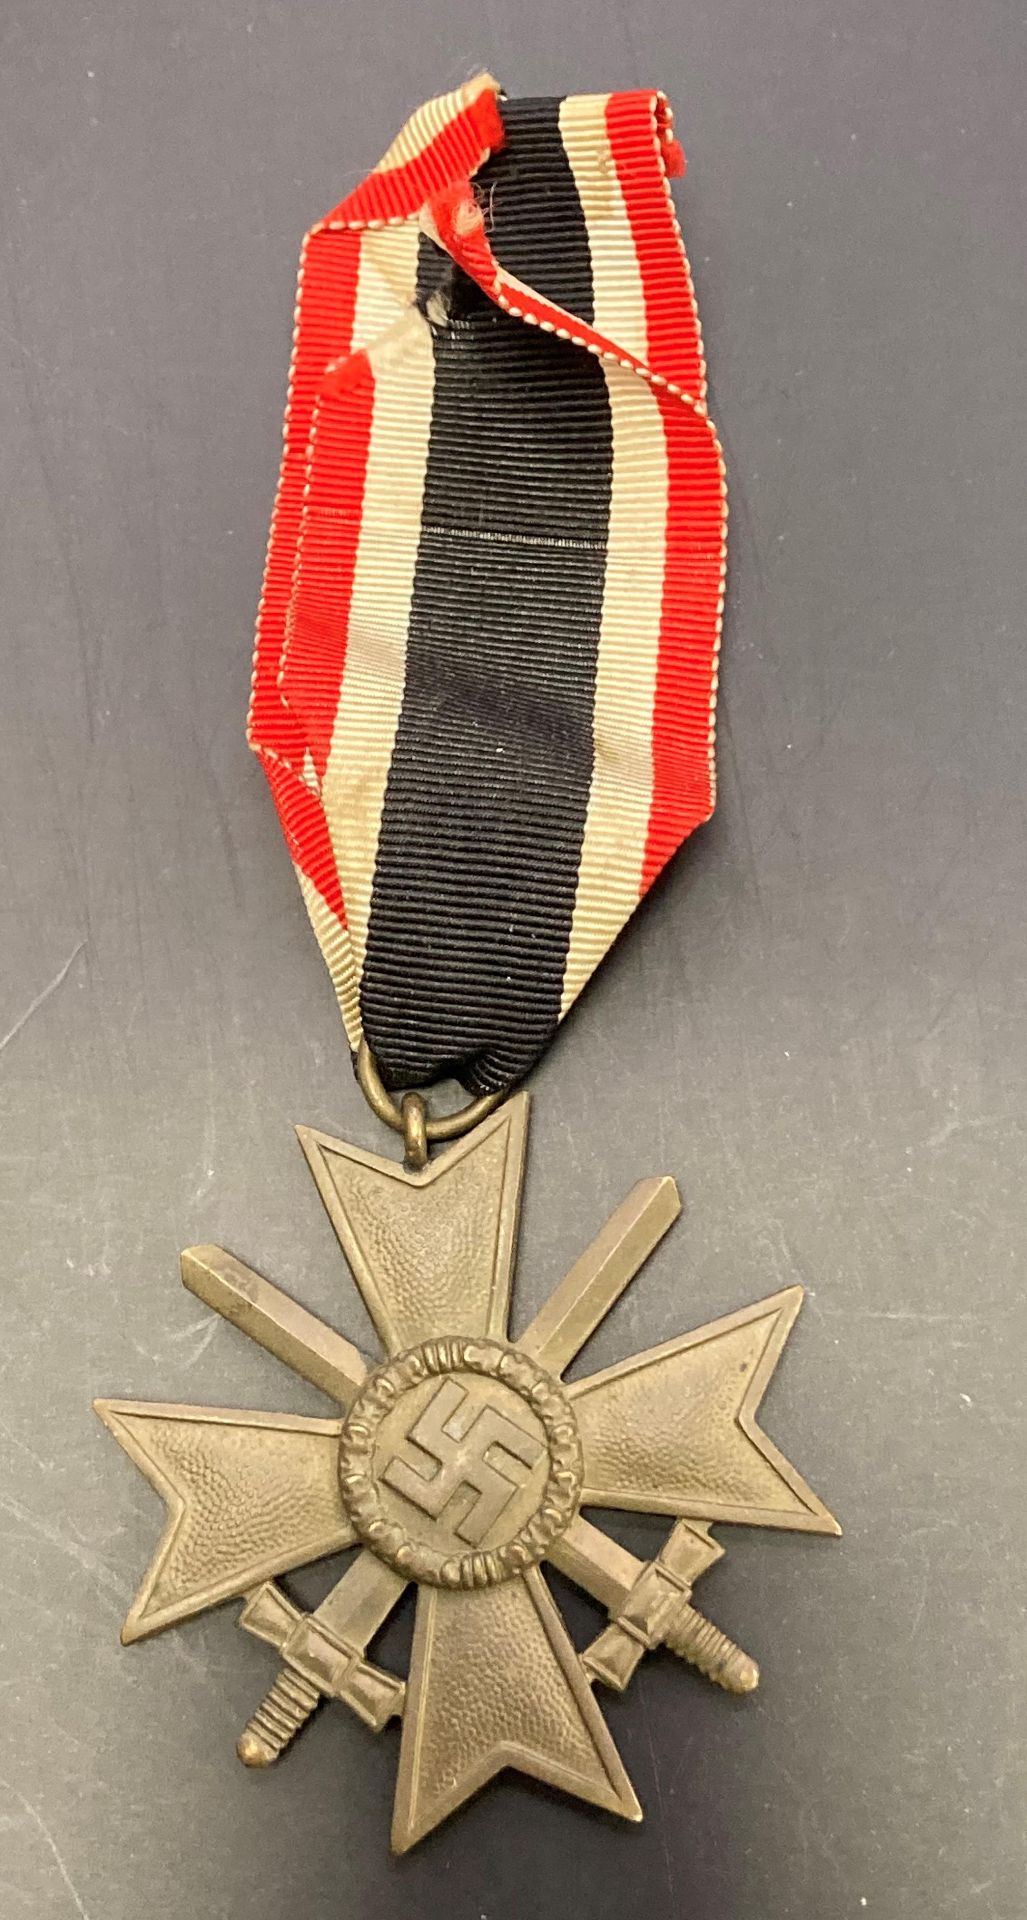 Two German Medals - 1939 Merit cross with swords and ribbon and 1st October 1938 Nazi Germany - Image 2 of 6